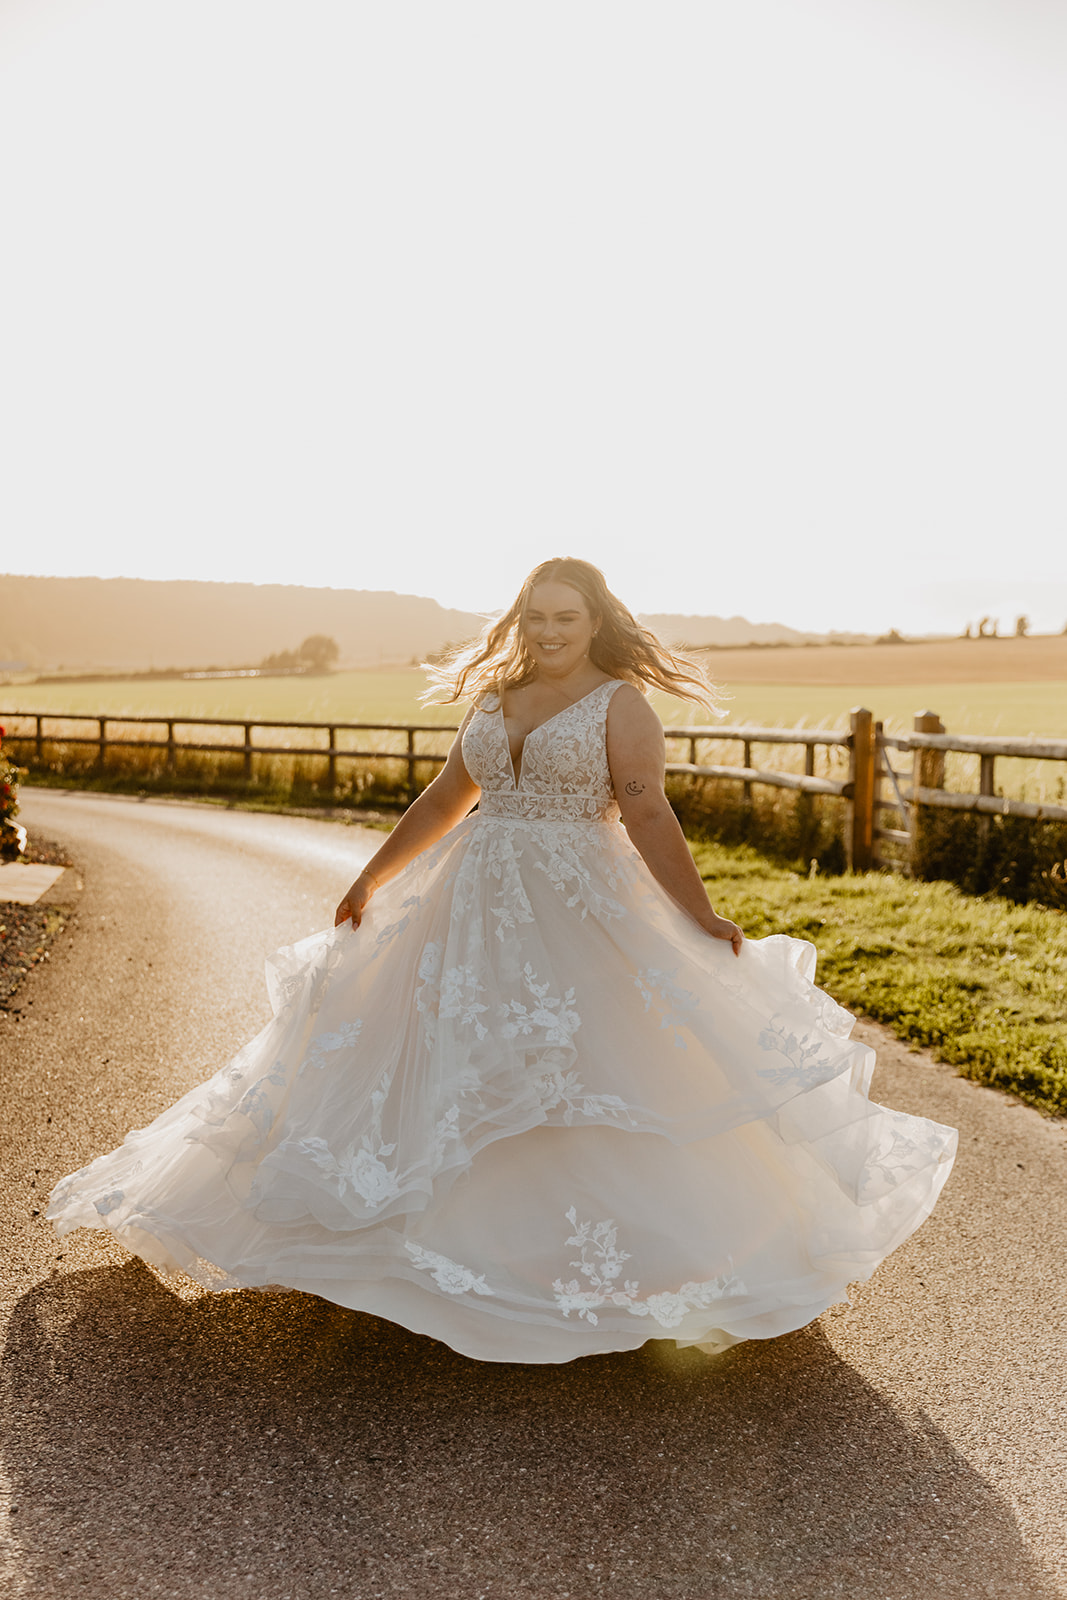 Bride at a Long Furlong Barn Wedding in Worthing, Sussex. By Olive Joy Photography.